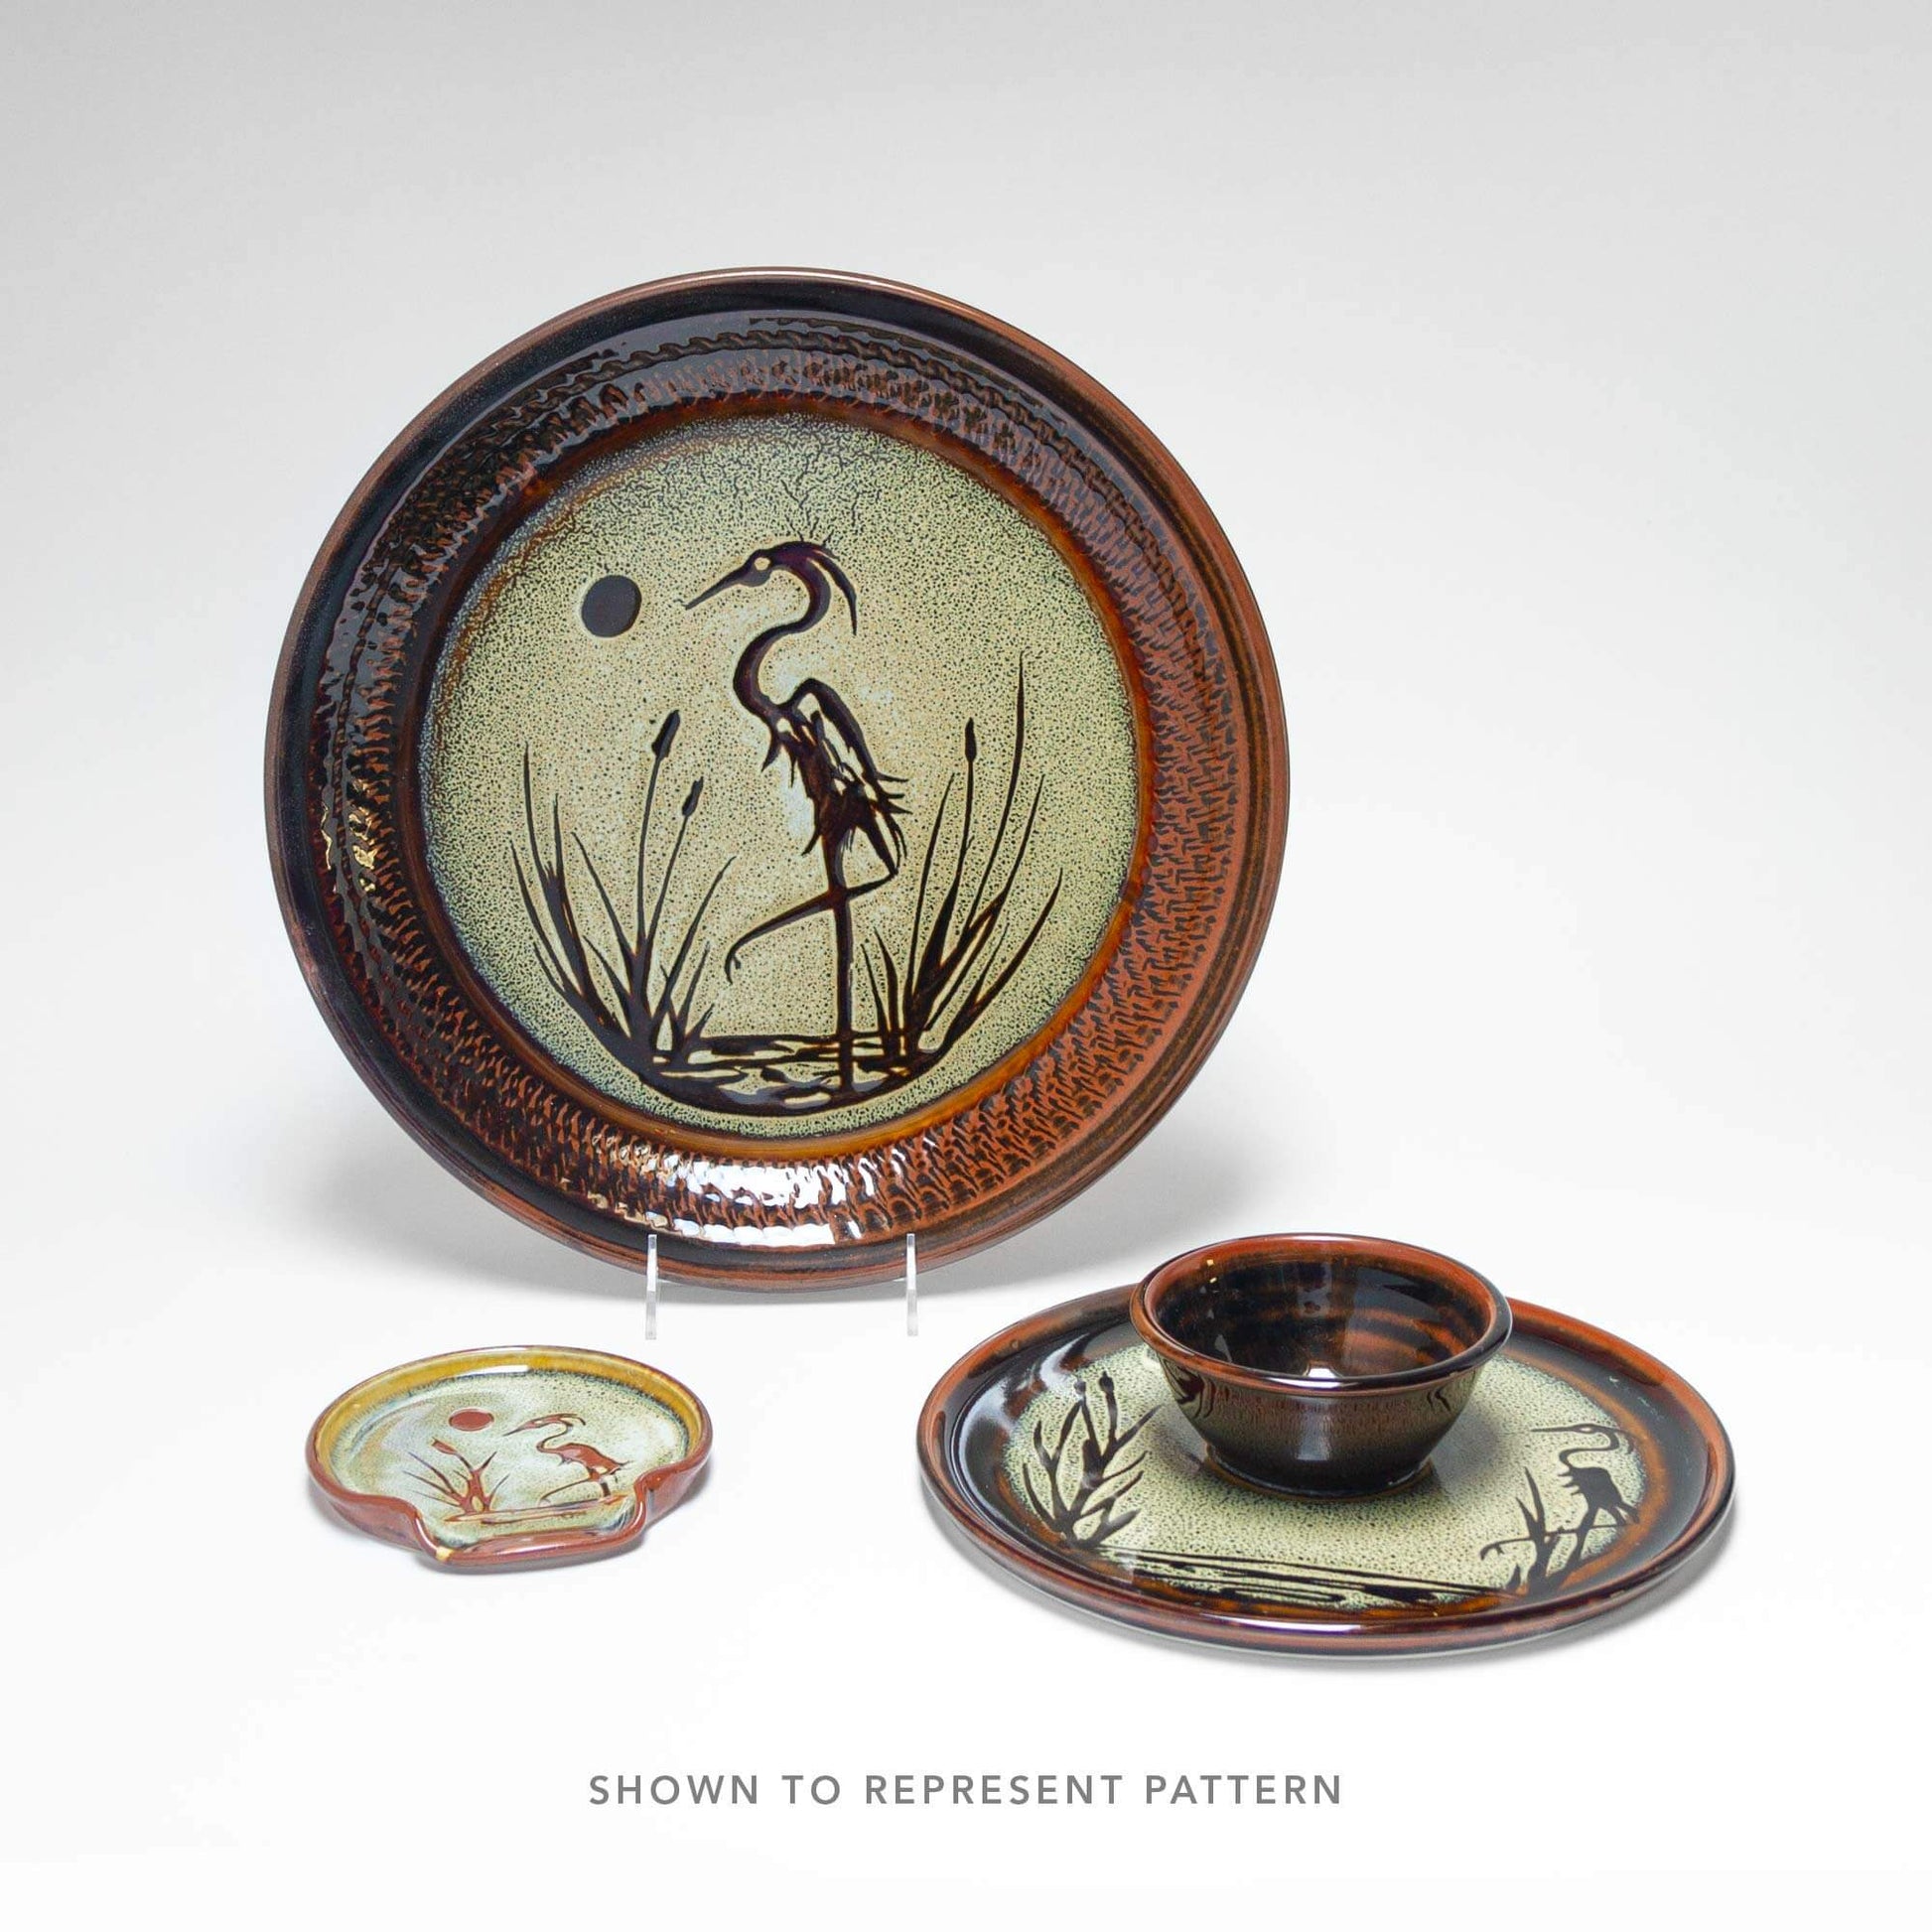 Handmade Pottery Small Clock w/ Stand in Hamada Heron pattern made by Georgetown Pottery in Maine